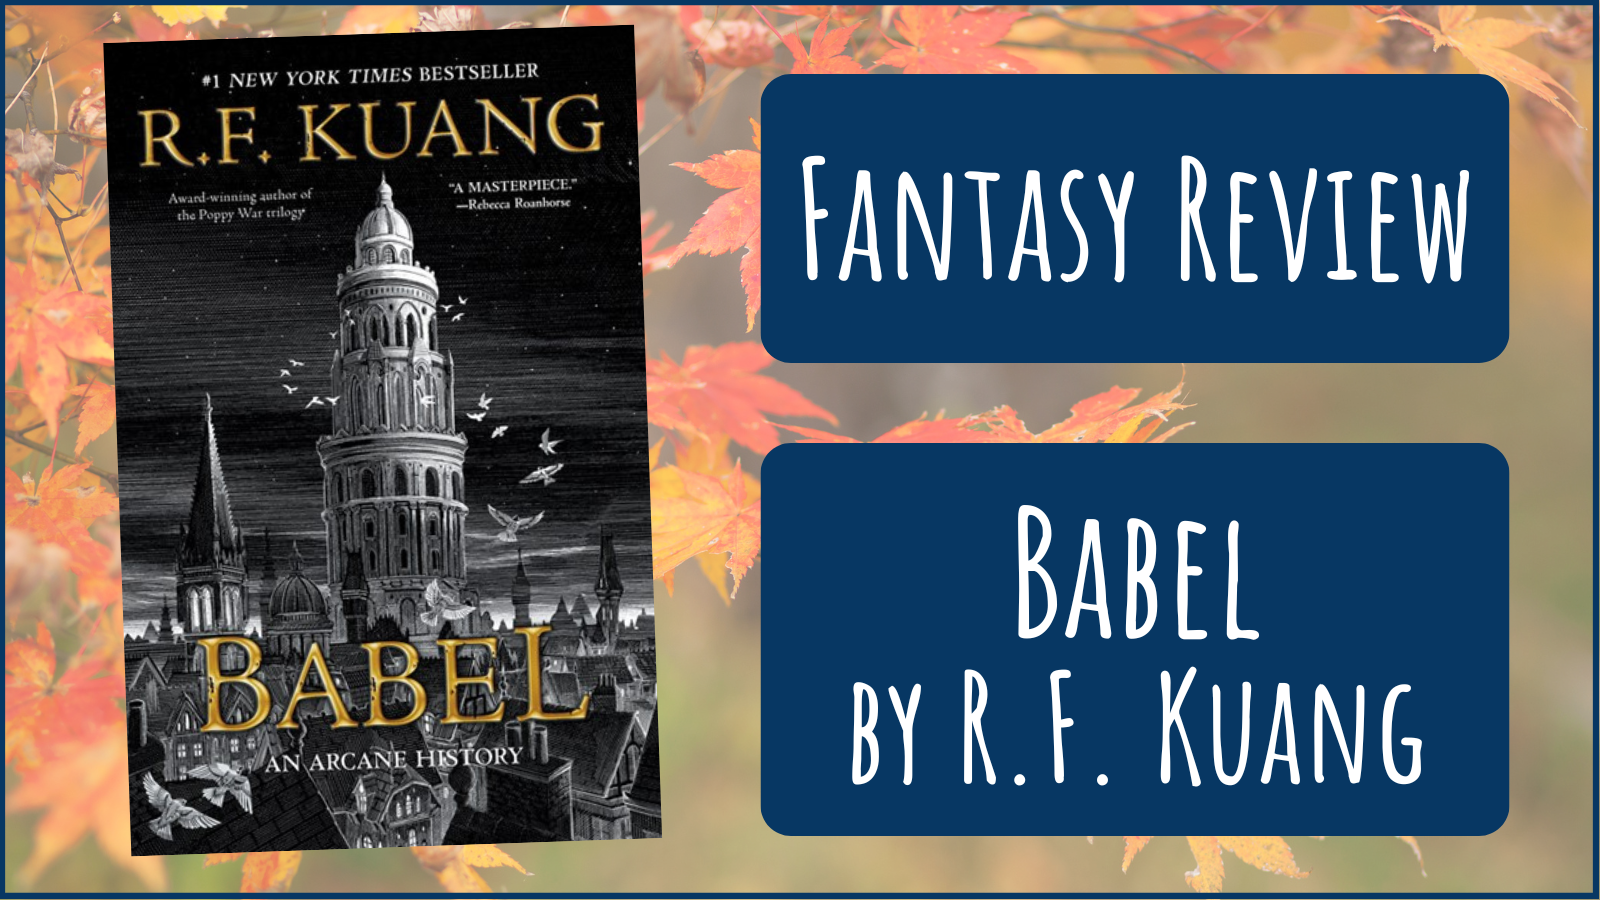 Book review: Babel by R F Kuang